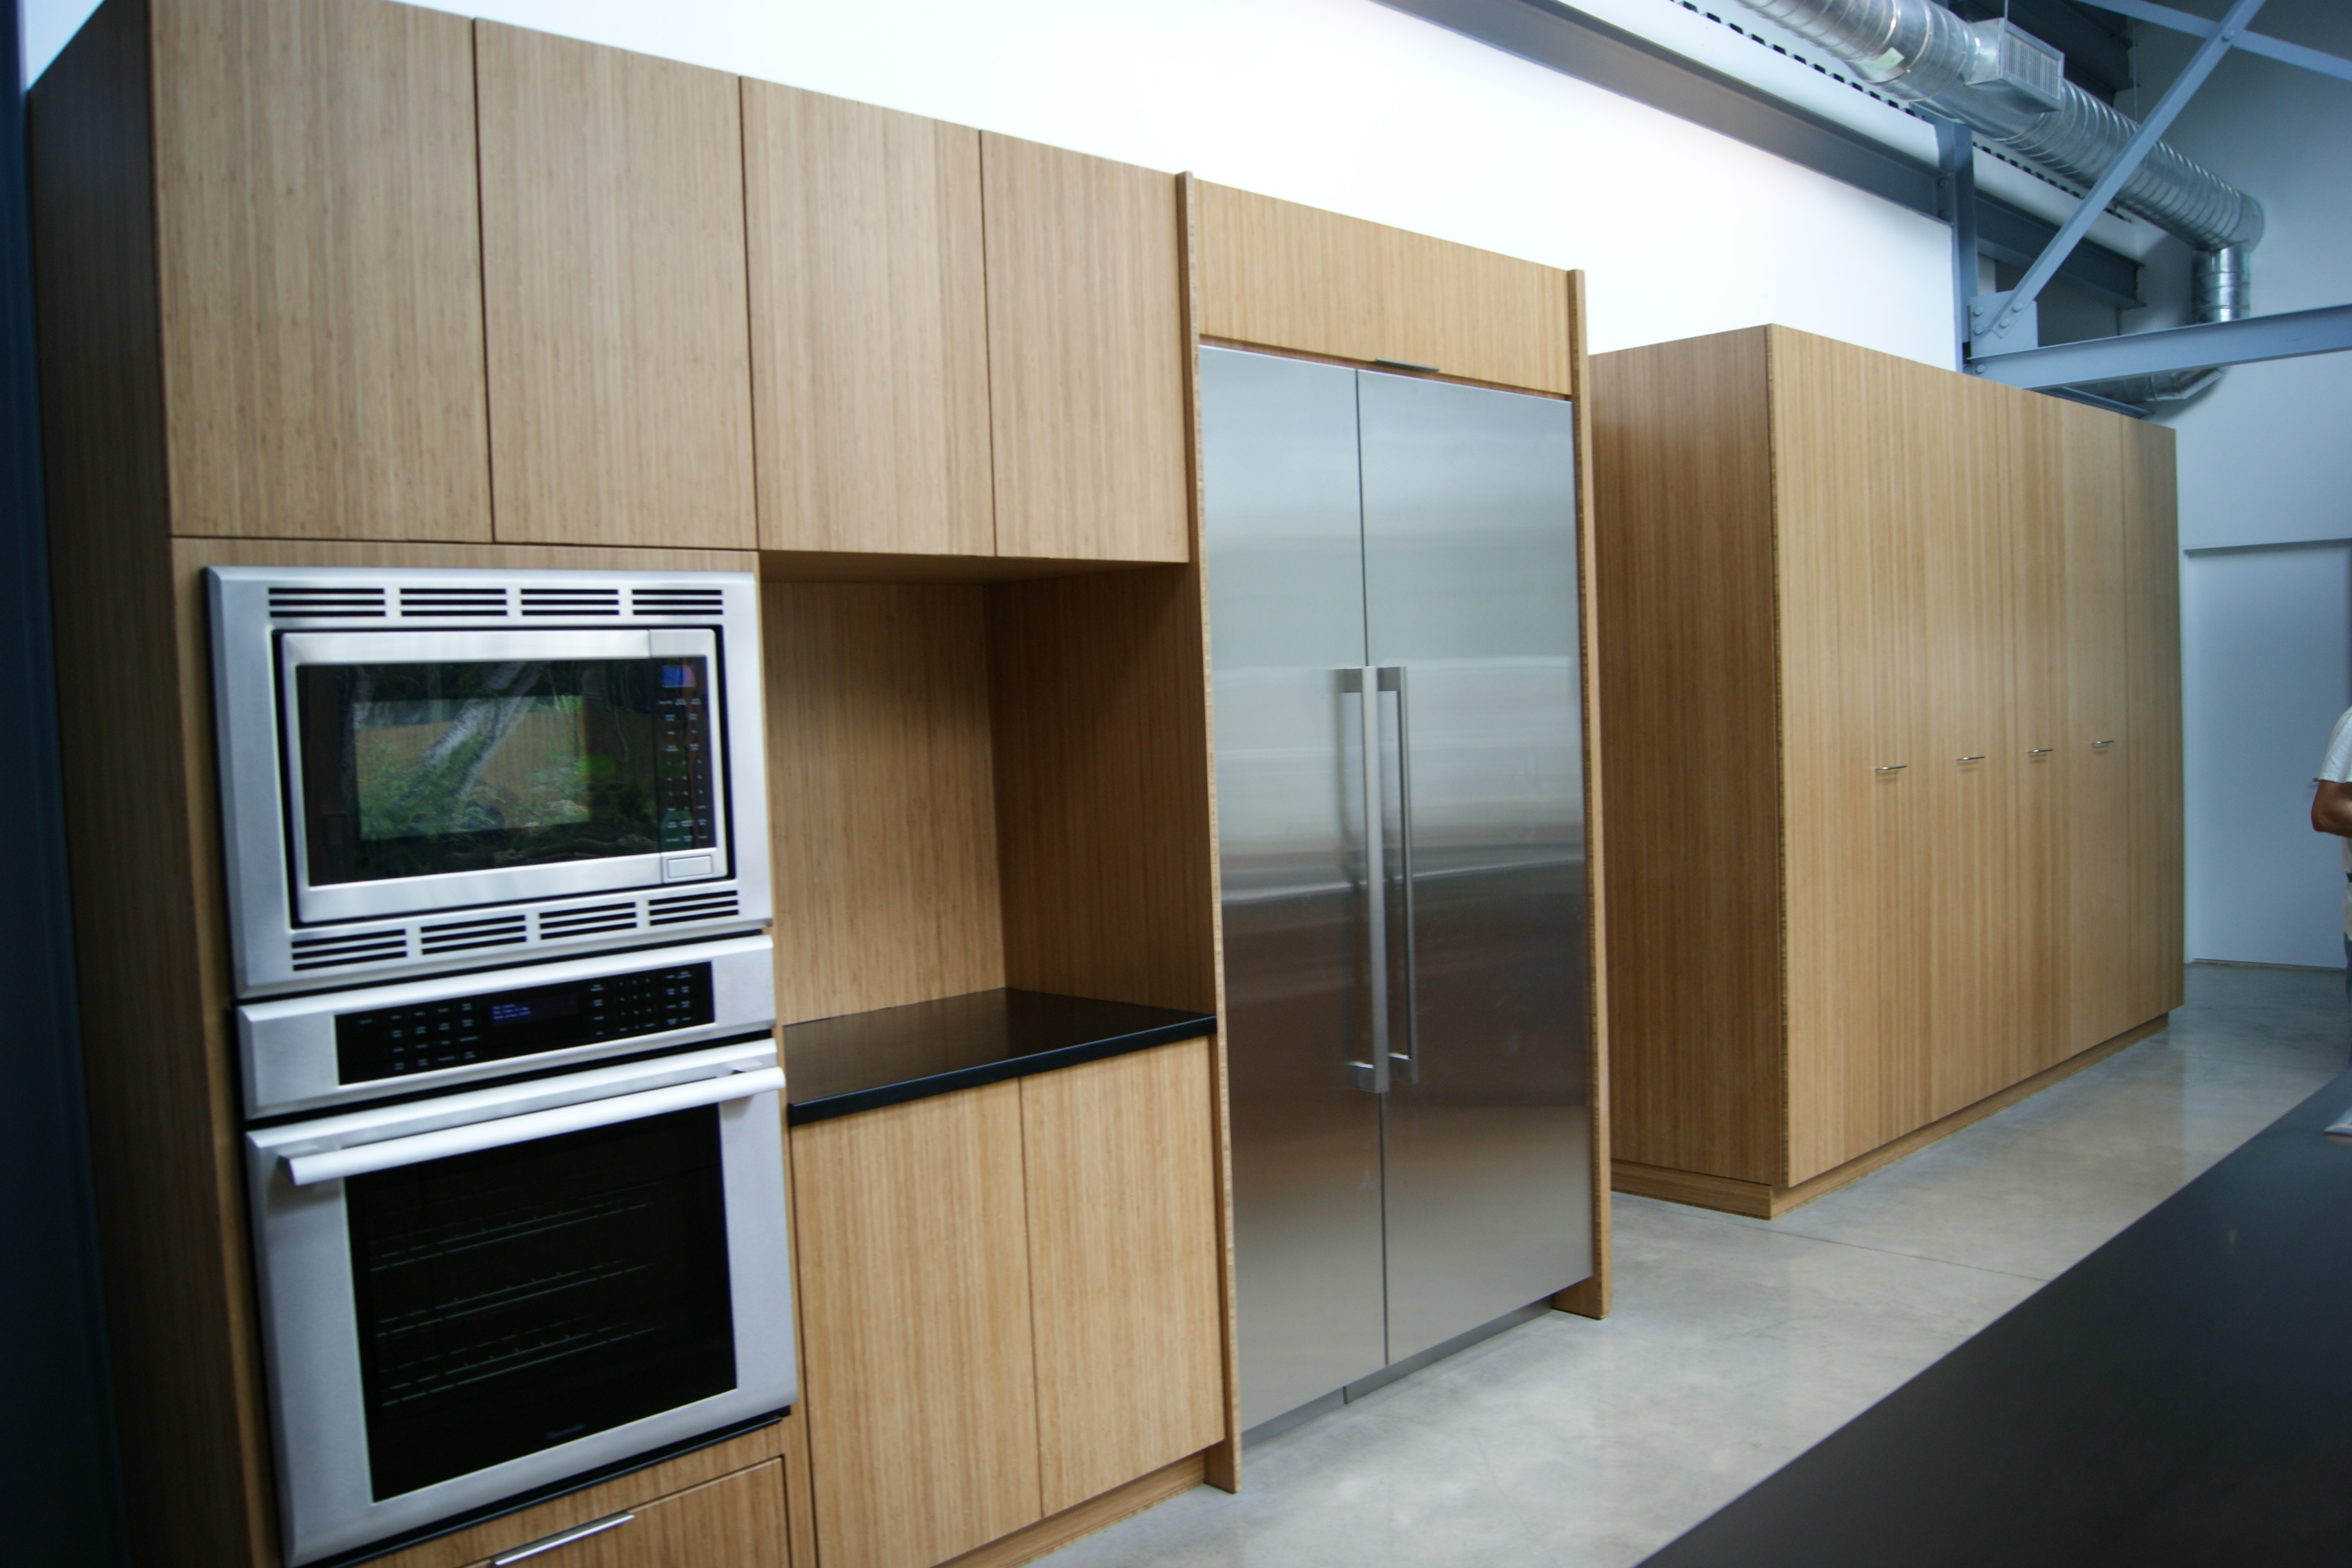 Plyboo kitchen cabinets